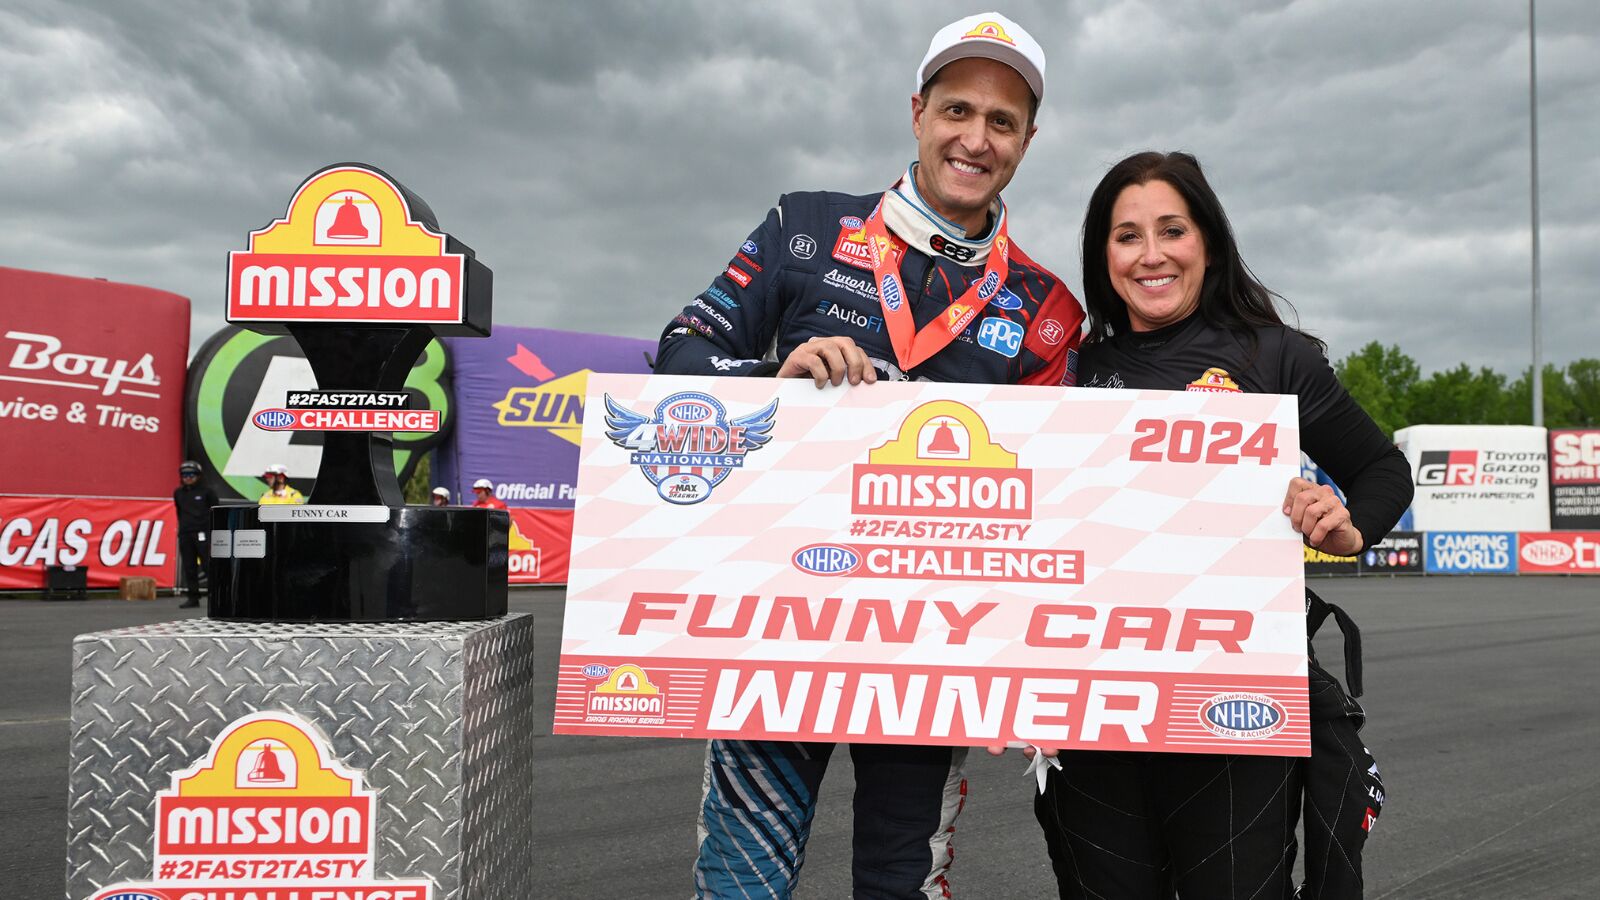 Tasca, Ashley, Enders, and Herrera Dominate NHRA Mission #2Fast2Tasty Challenge at zMAX Dragway